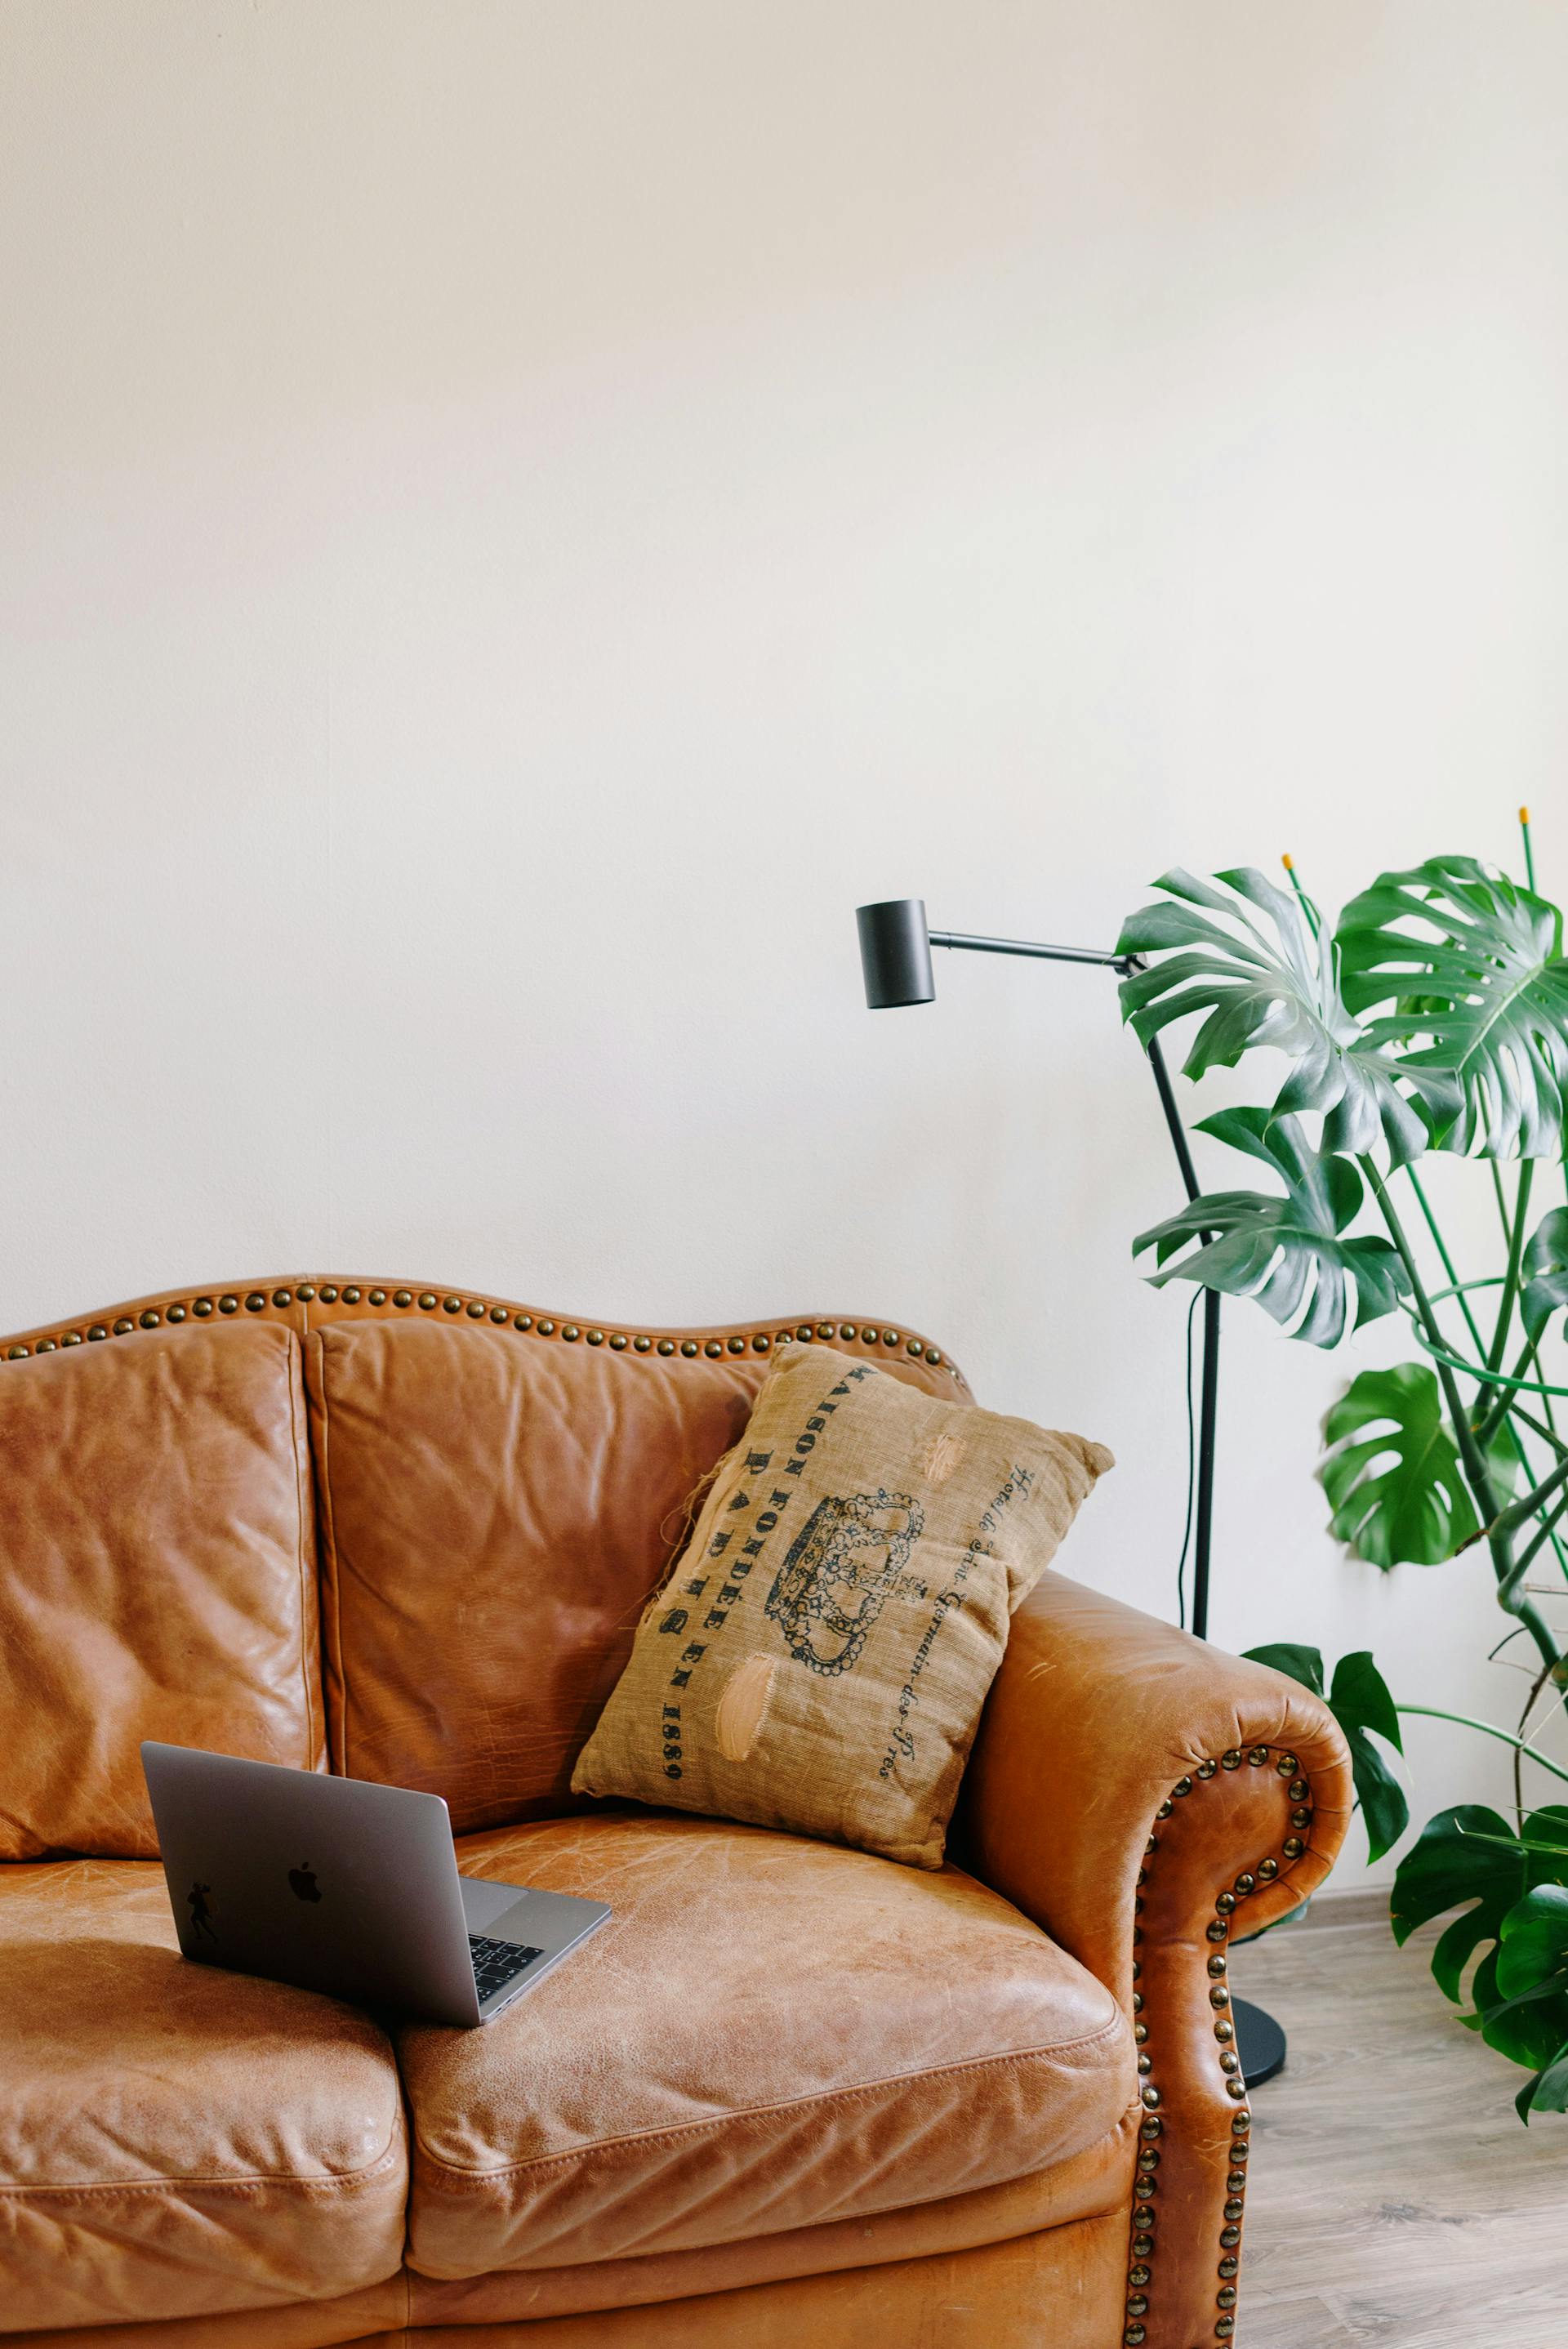 A laptop on a couch | Source: Pexels